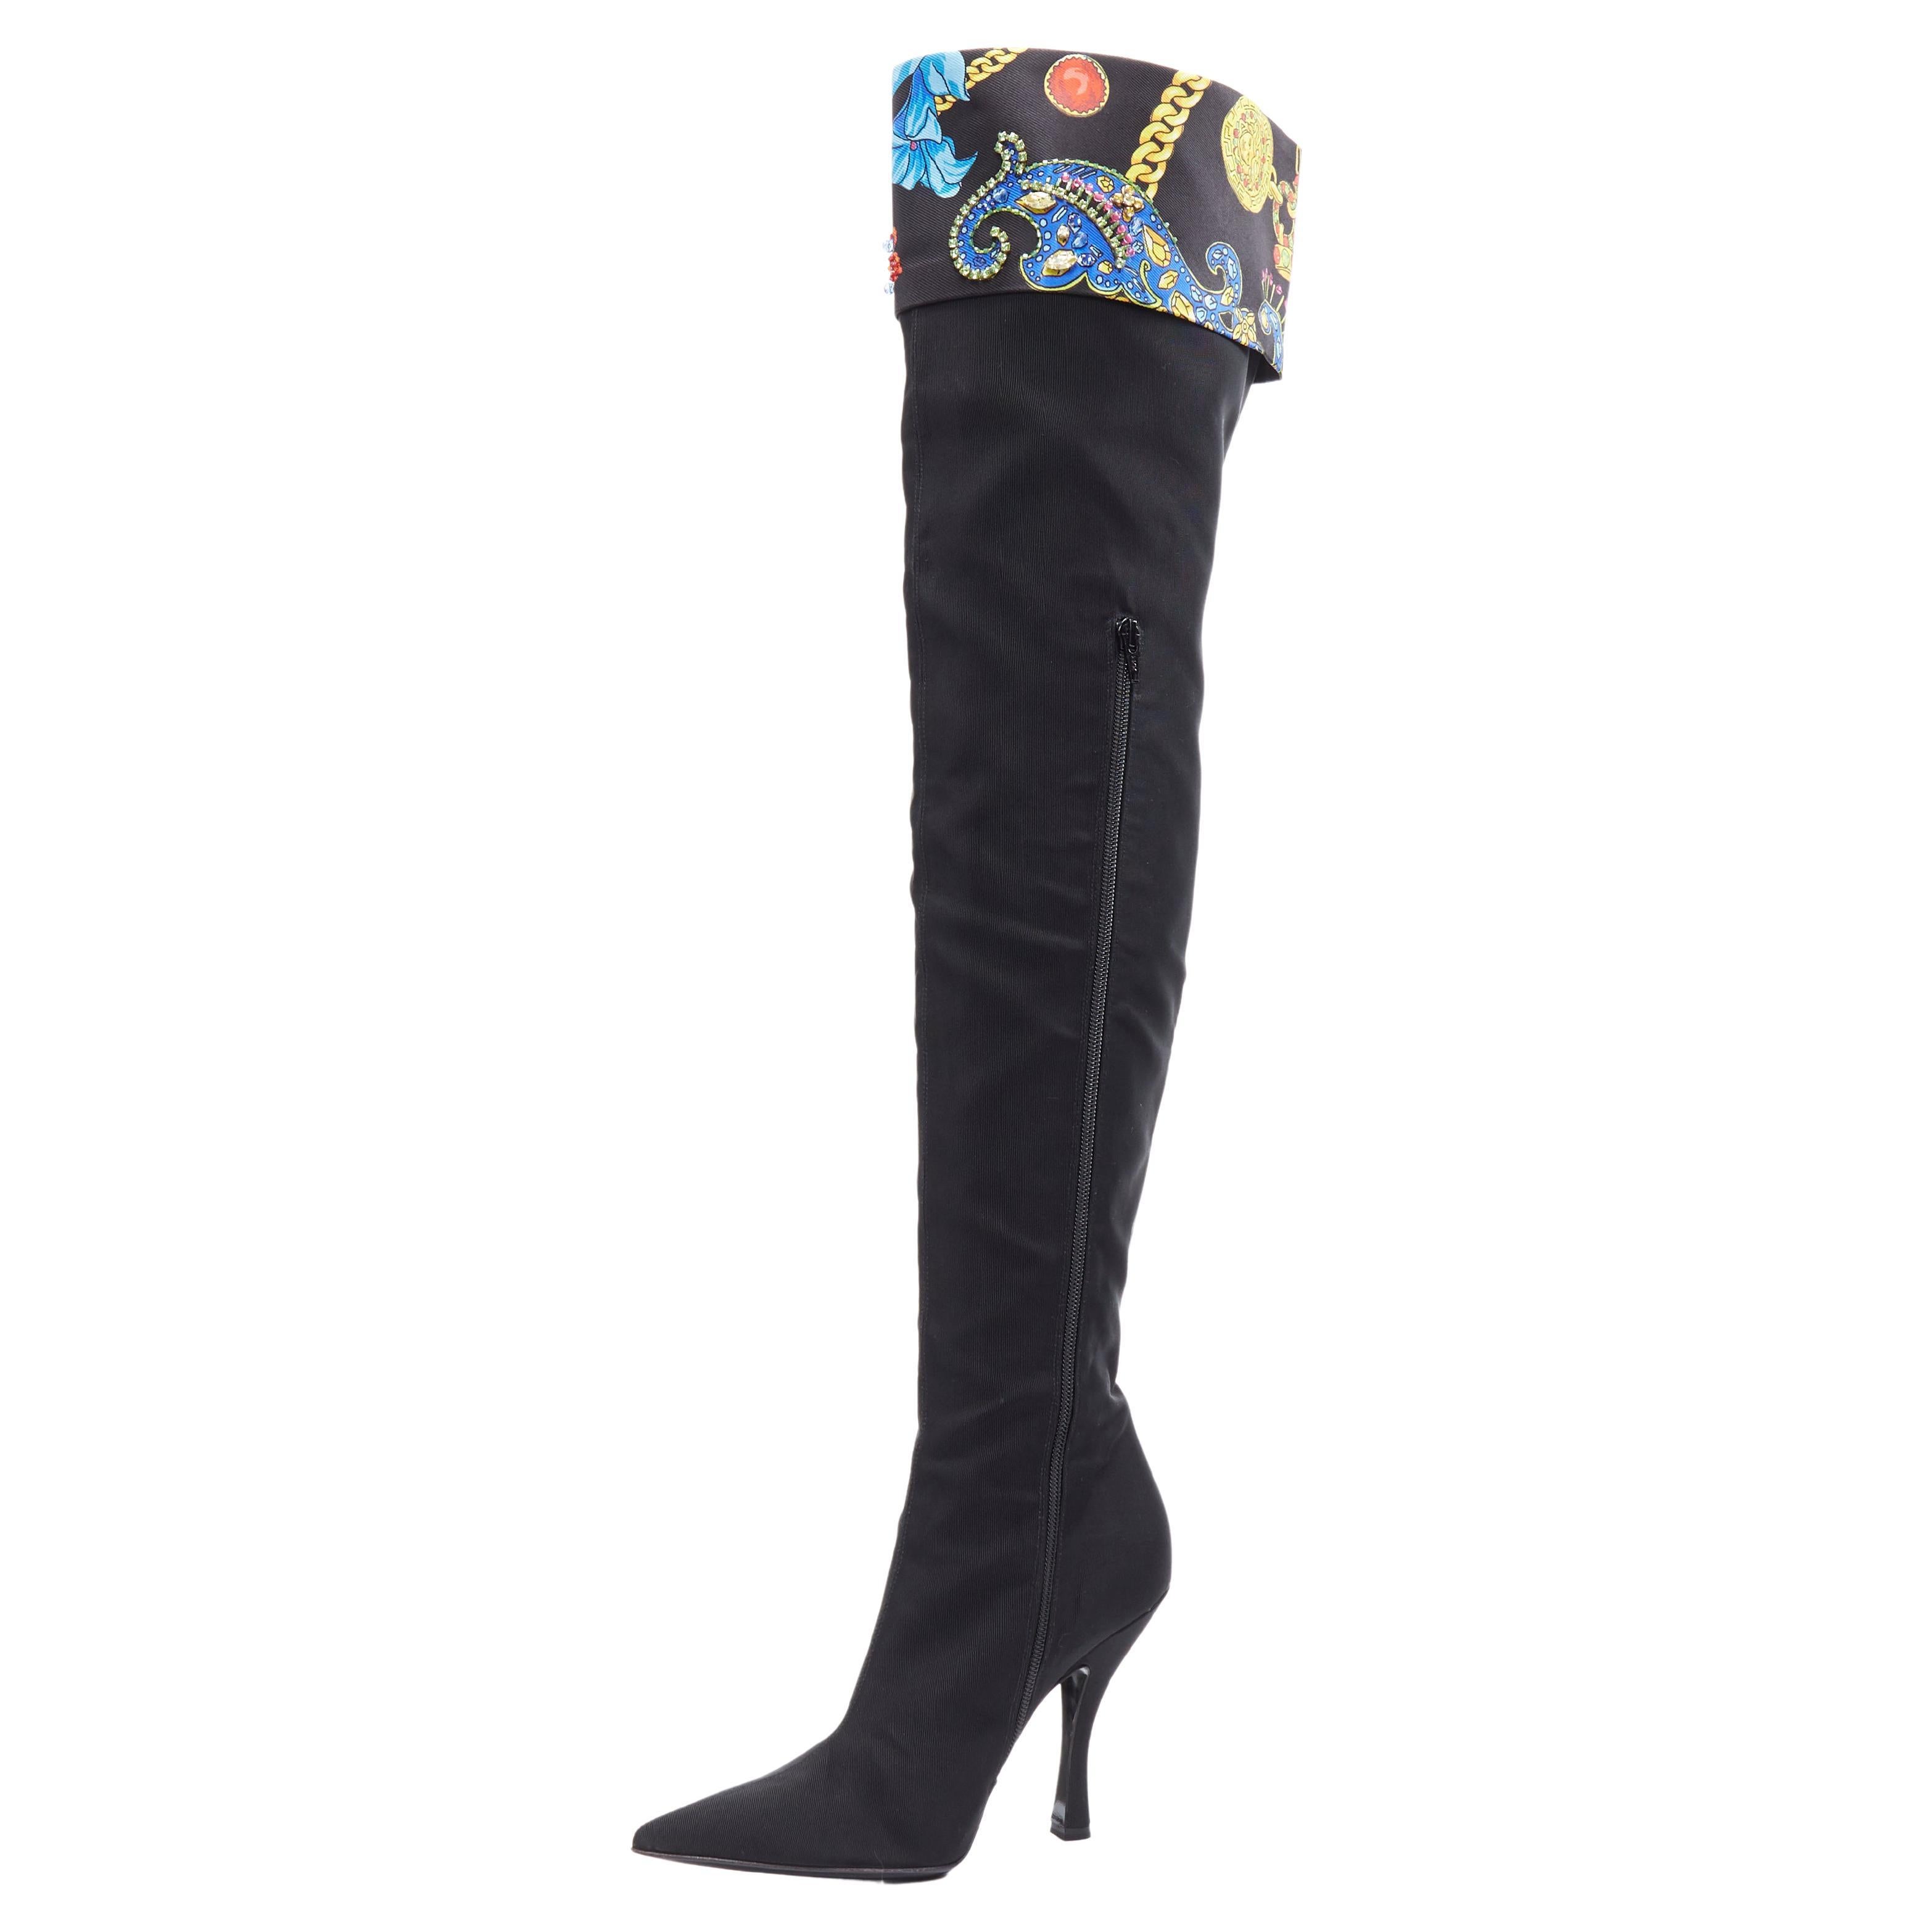 new VERSACE SS19 runway black chain crystal embellished fold over knee boot EU40 Reference: TGAS/A03505 
Brand: Versace 
Designer: Donatella Versace 
Collection: Spring Summer 2019 Runway 
Material: Fabric 
Color: Black 
Pattern: Solid 
Closure: Zip